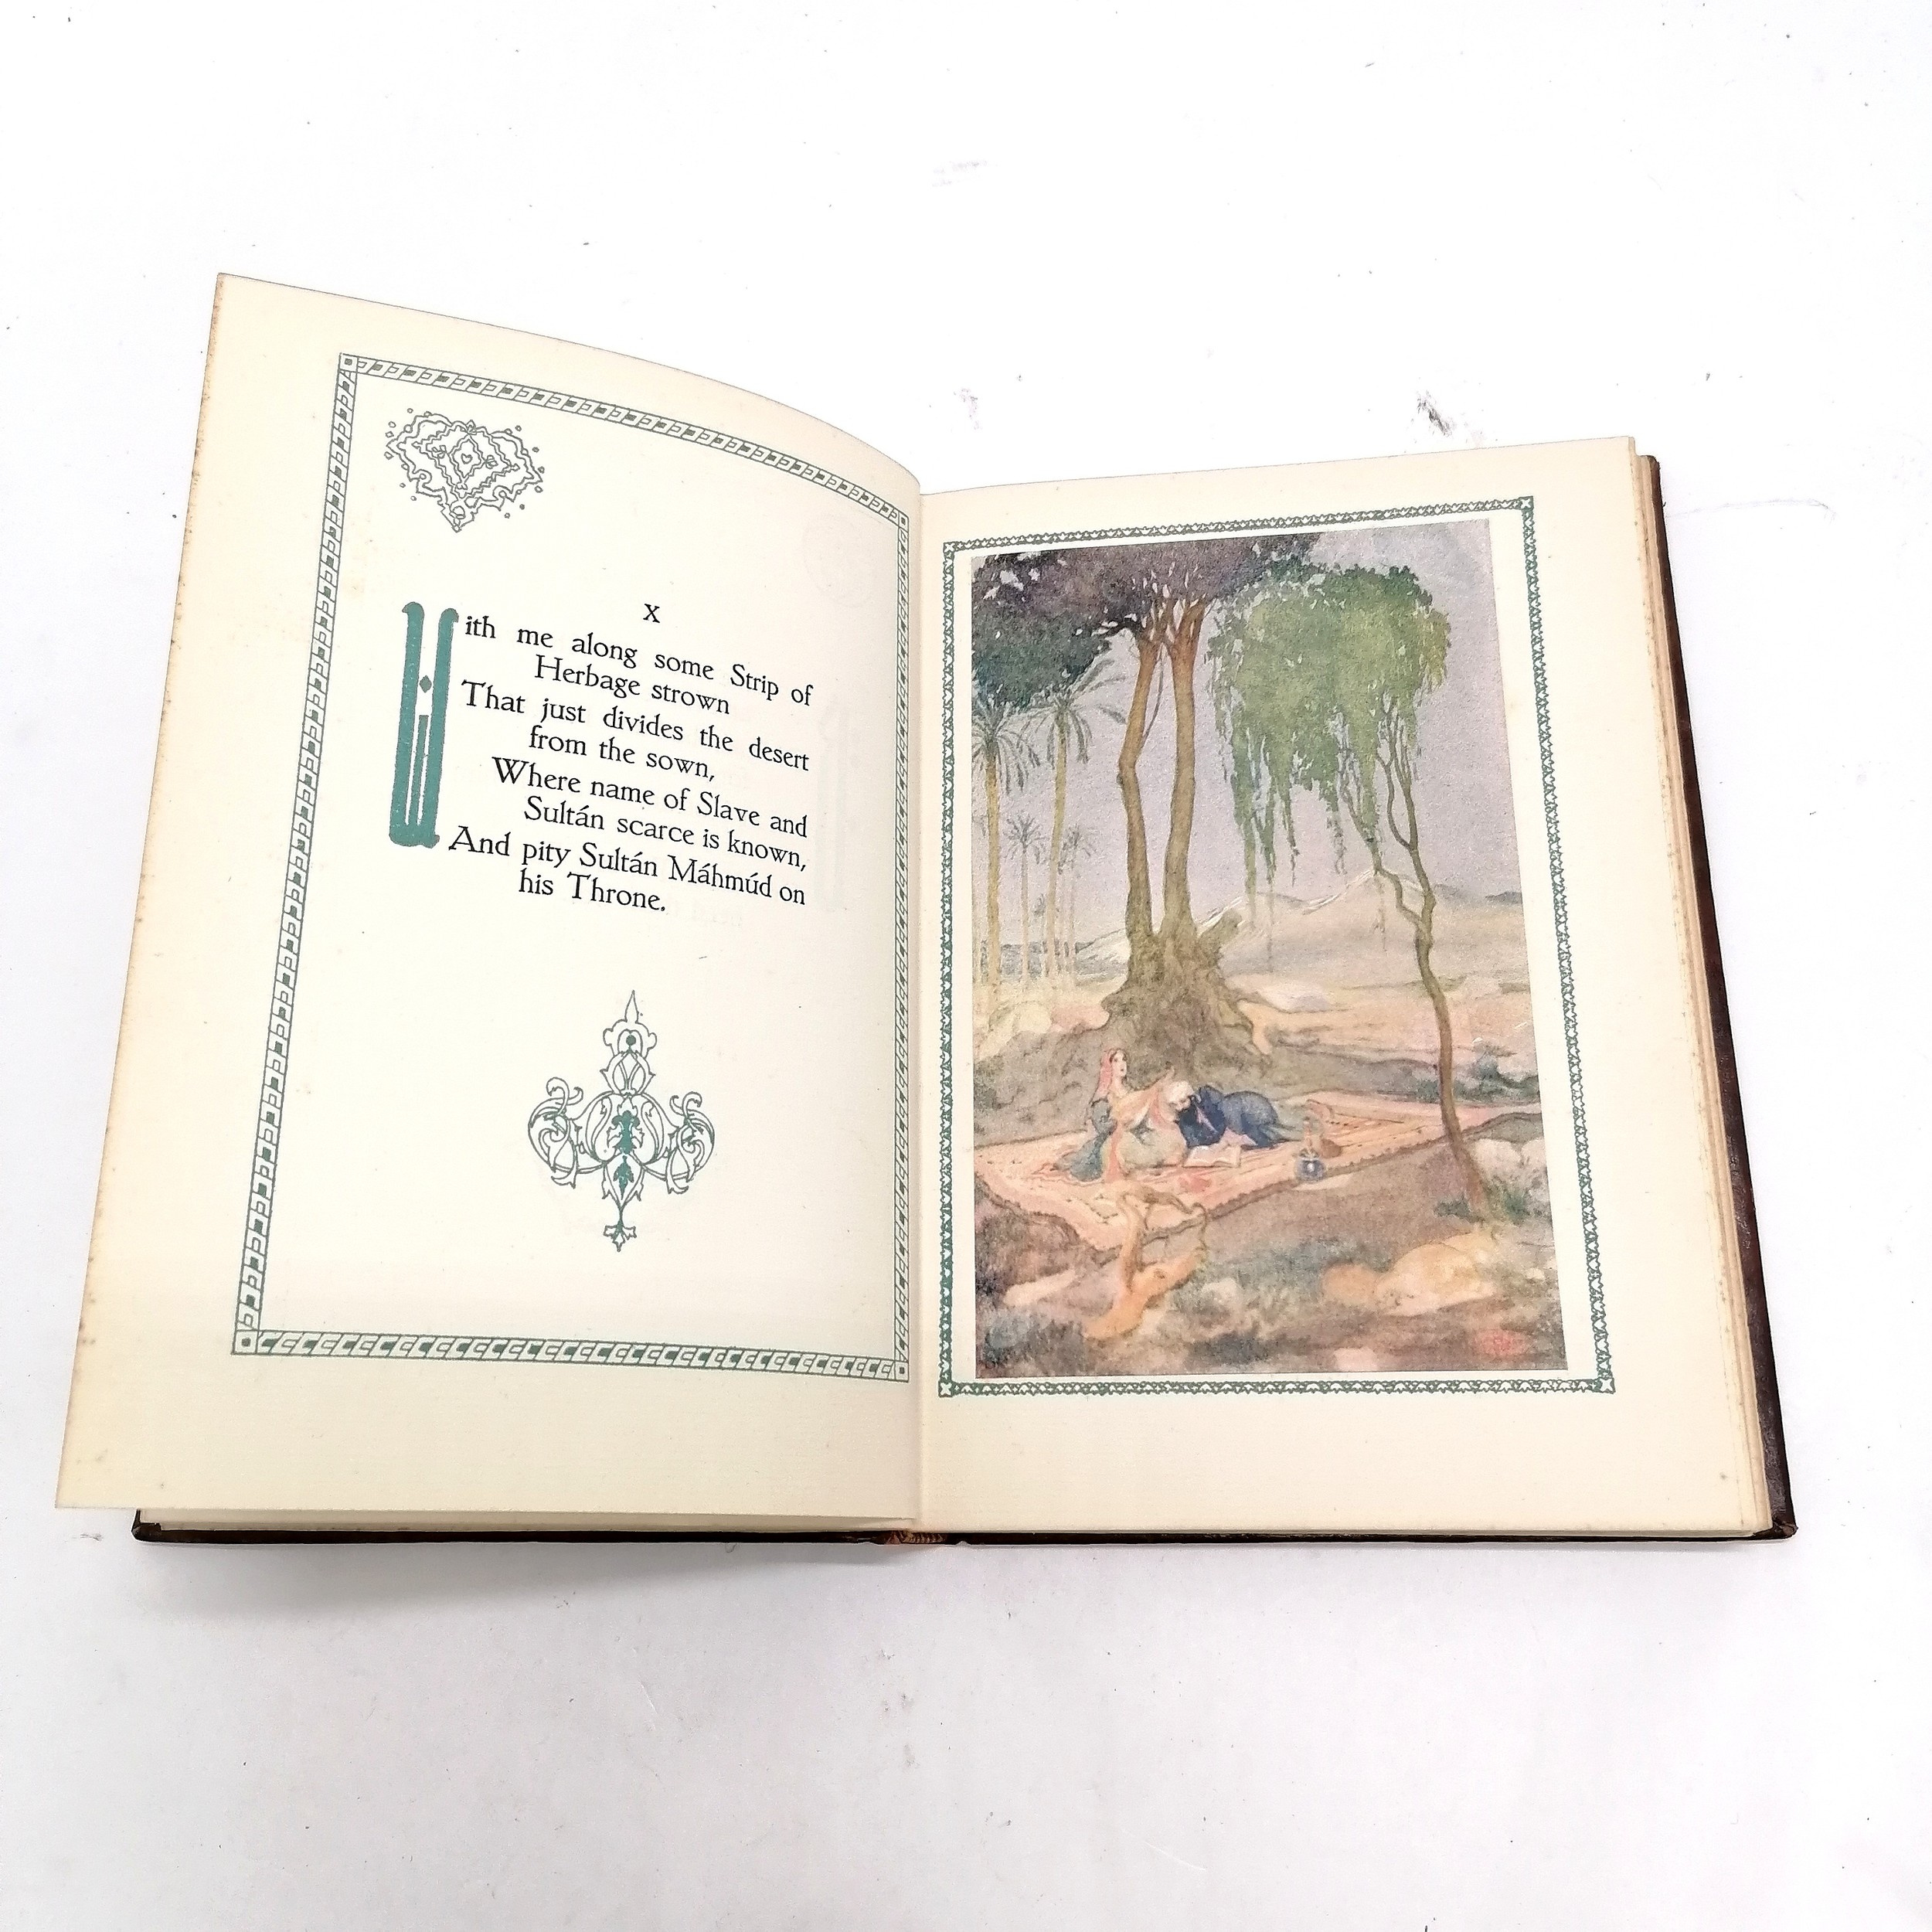 (1909+) Rubaiyat of Omar Khayyam (George Harrap) book with illustrations by William 'Willy' Andrew - Image 4 of 8